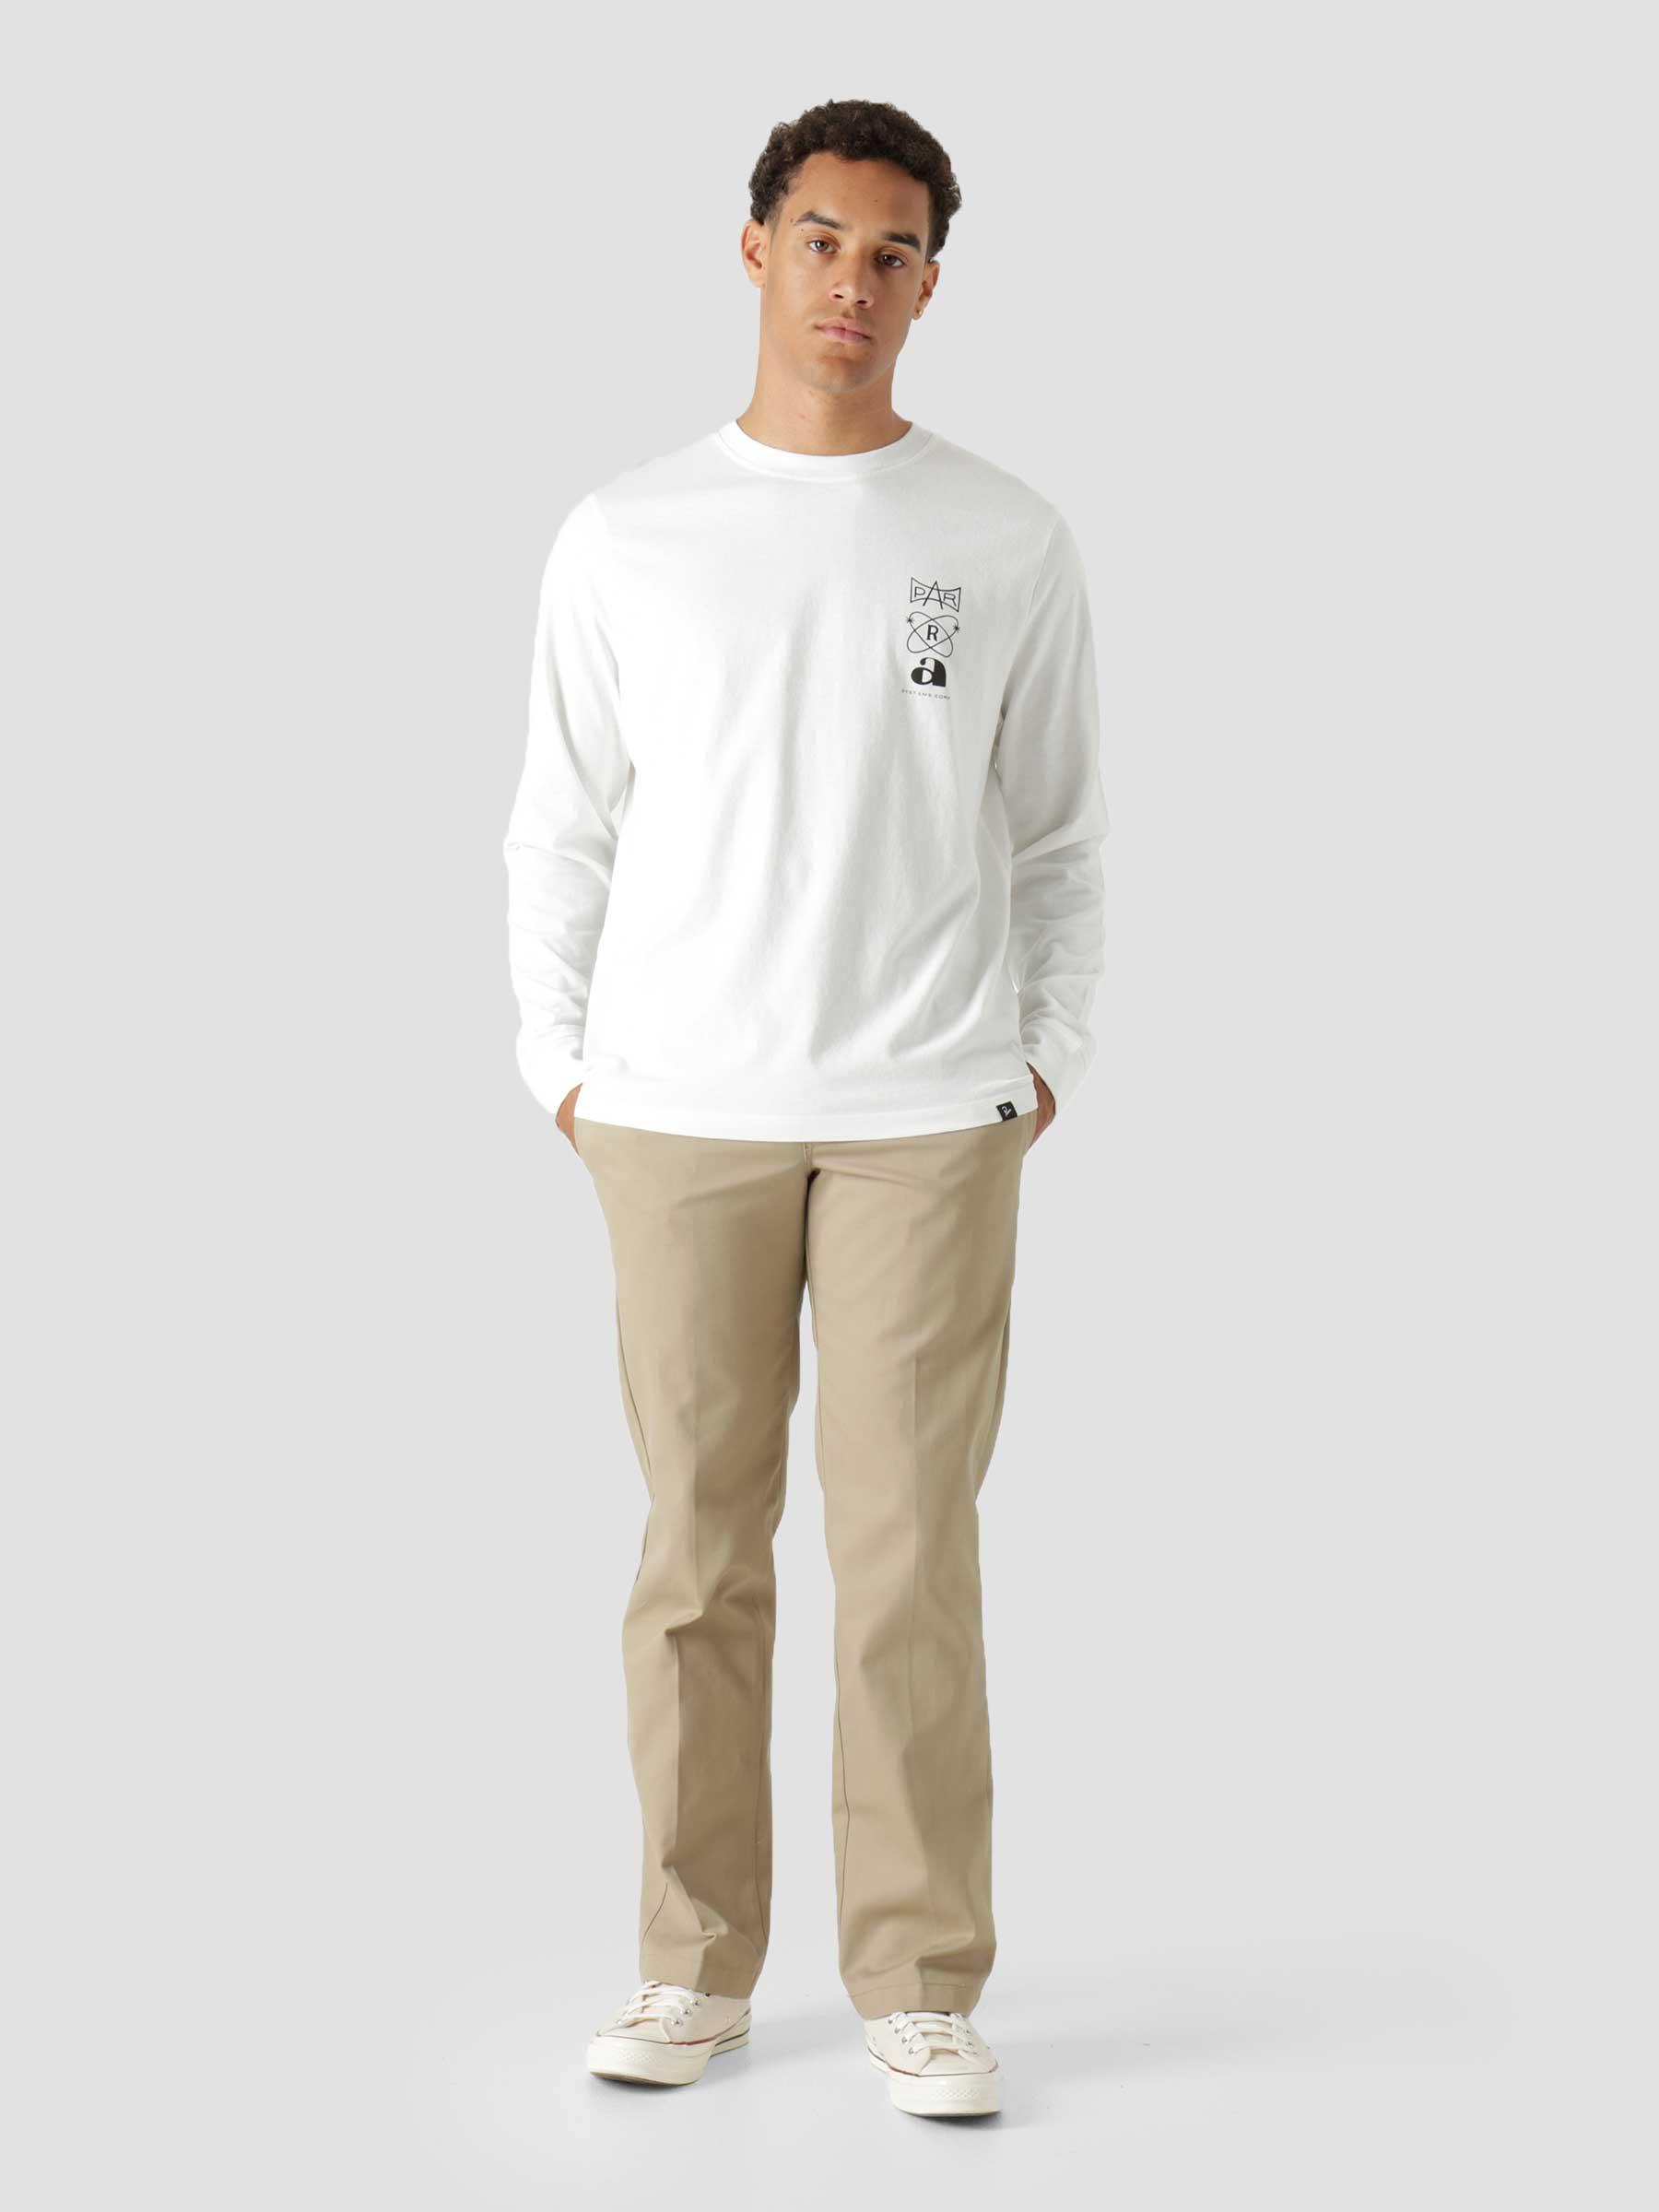 Rest Day Long Sleeve T-Shirt White 46210